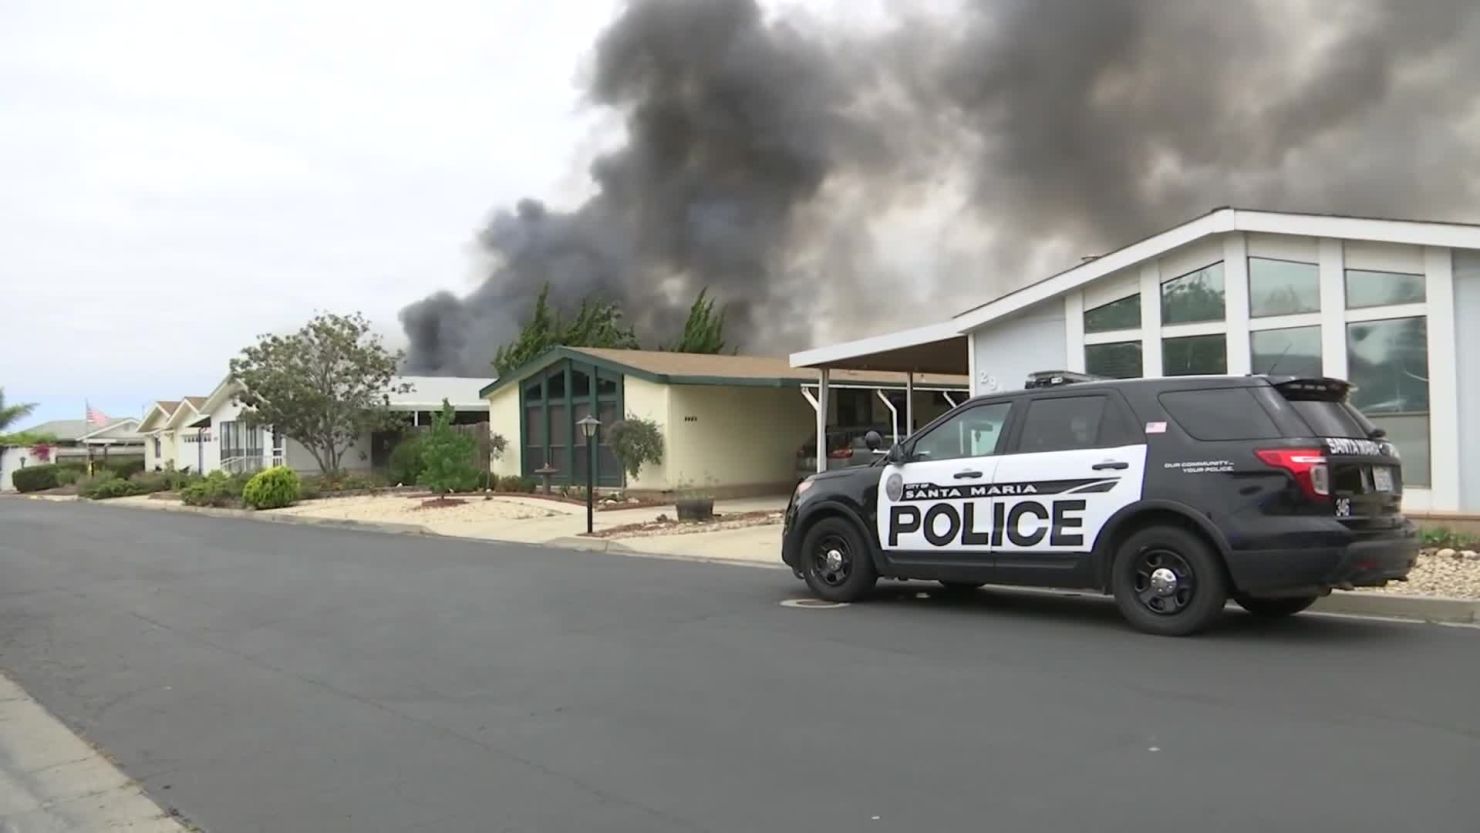 A mobile home was set on fire in Santa Maria, California on Friday, June 21, 2019.